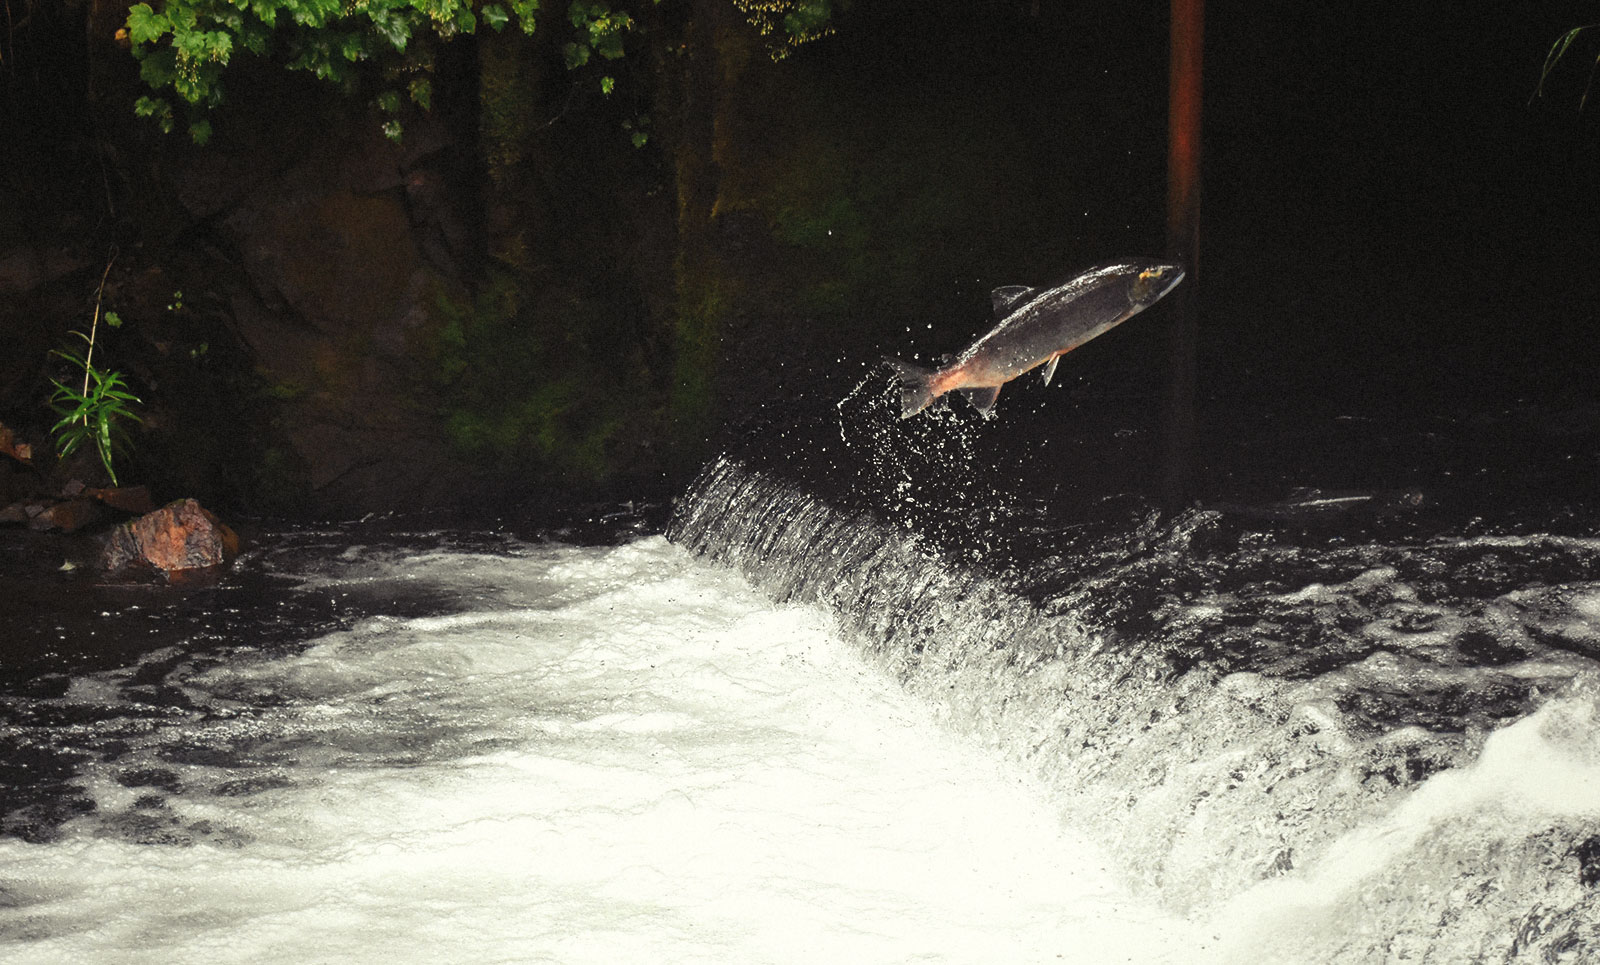 A wild salmon jumping up out of the water and about to swim upstream